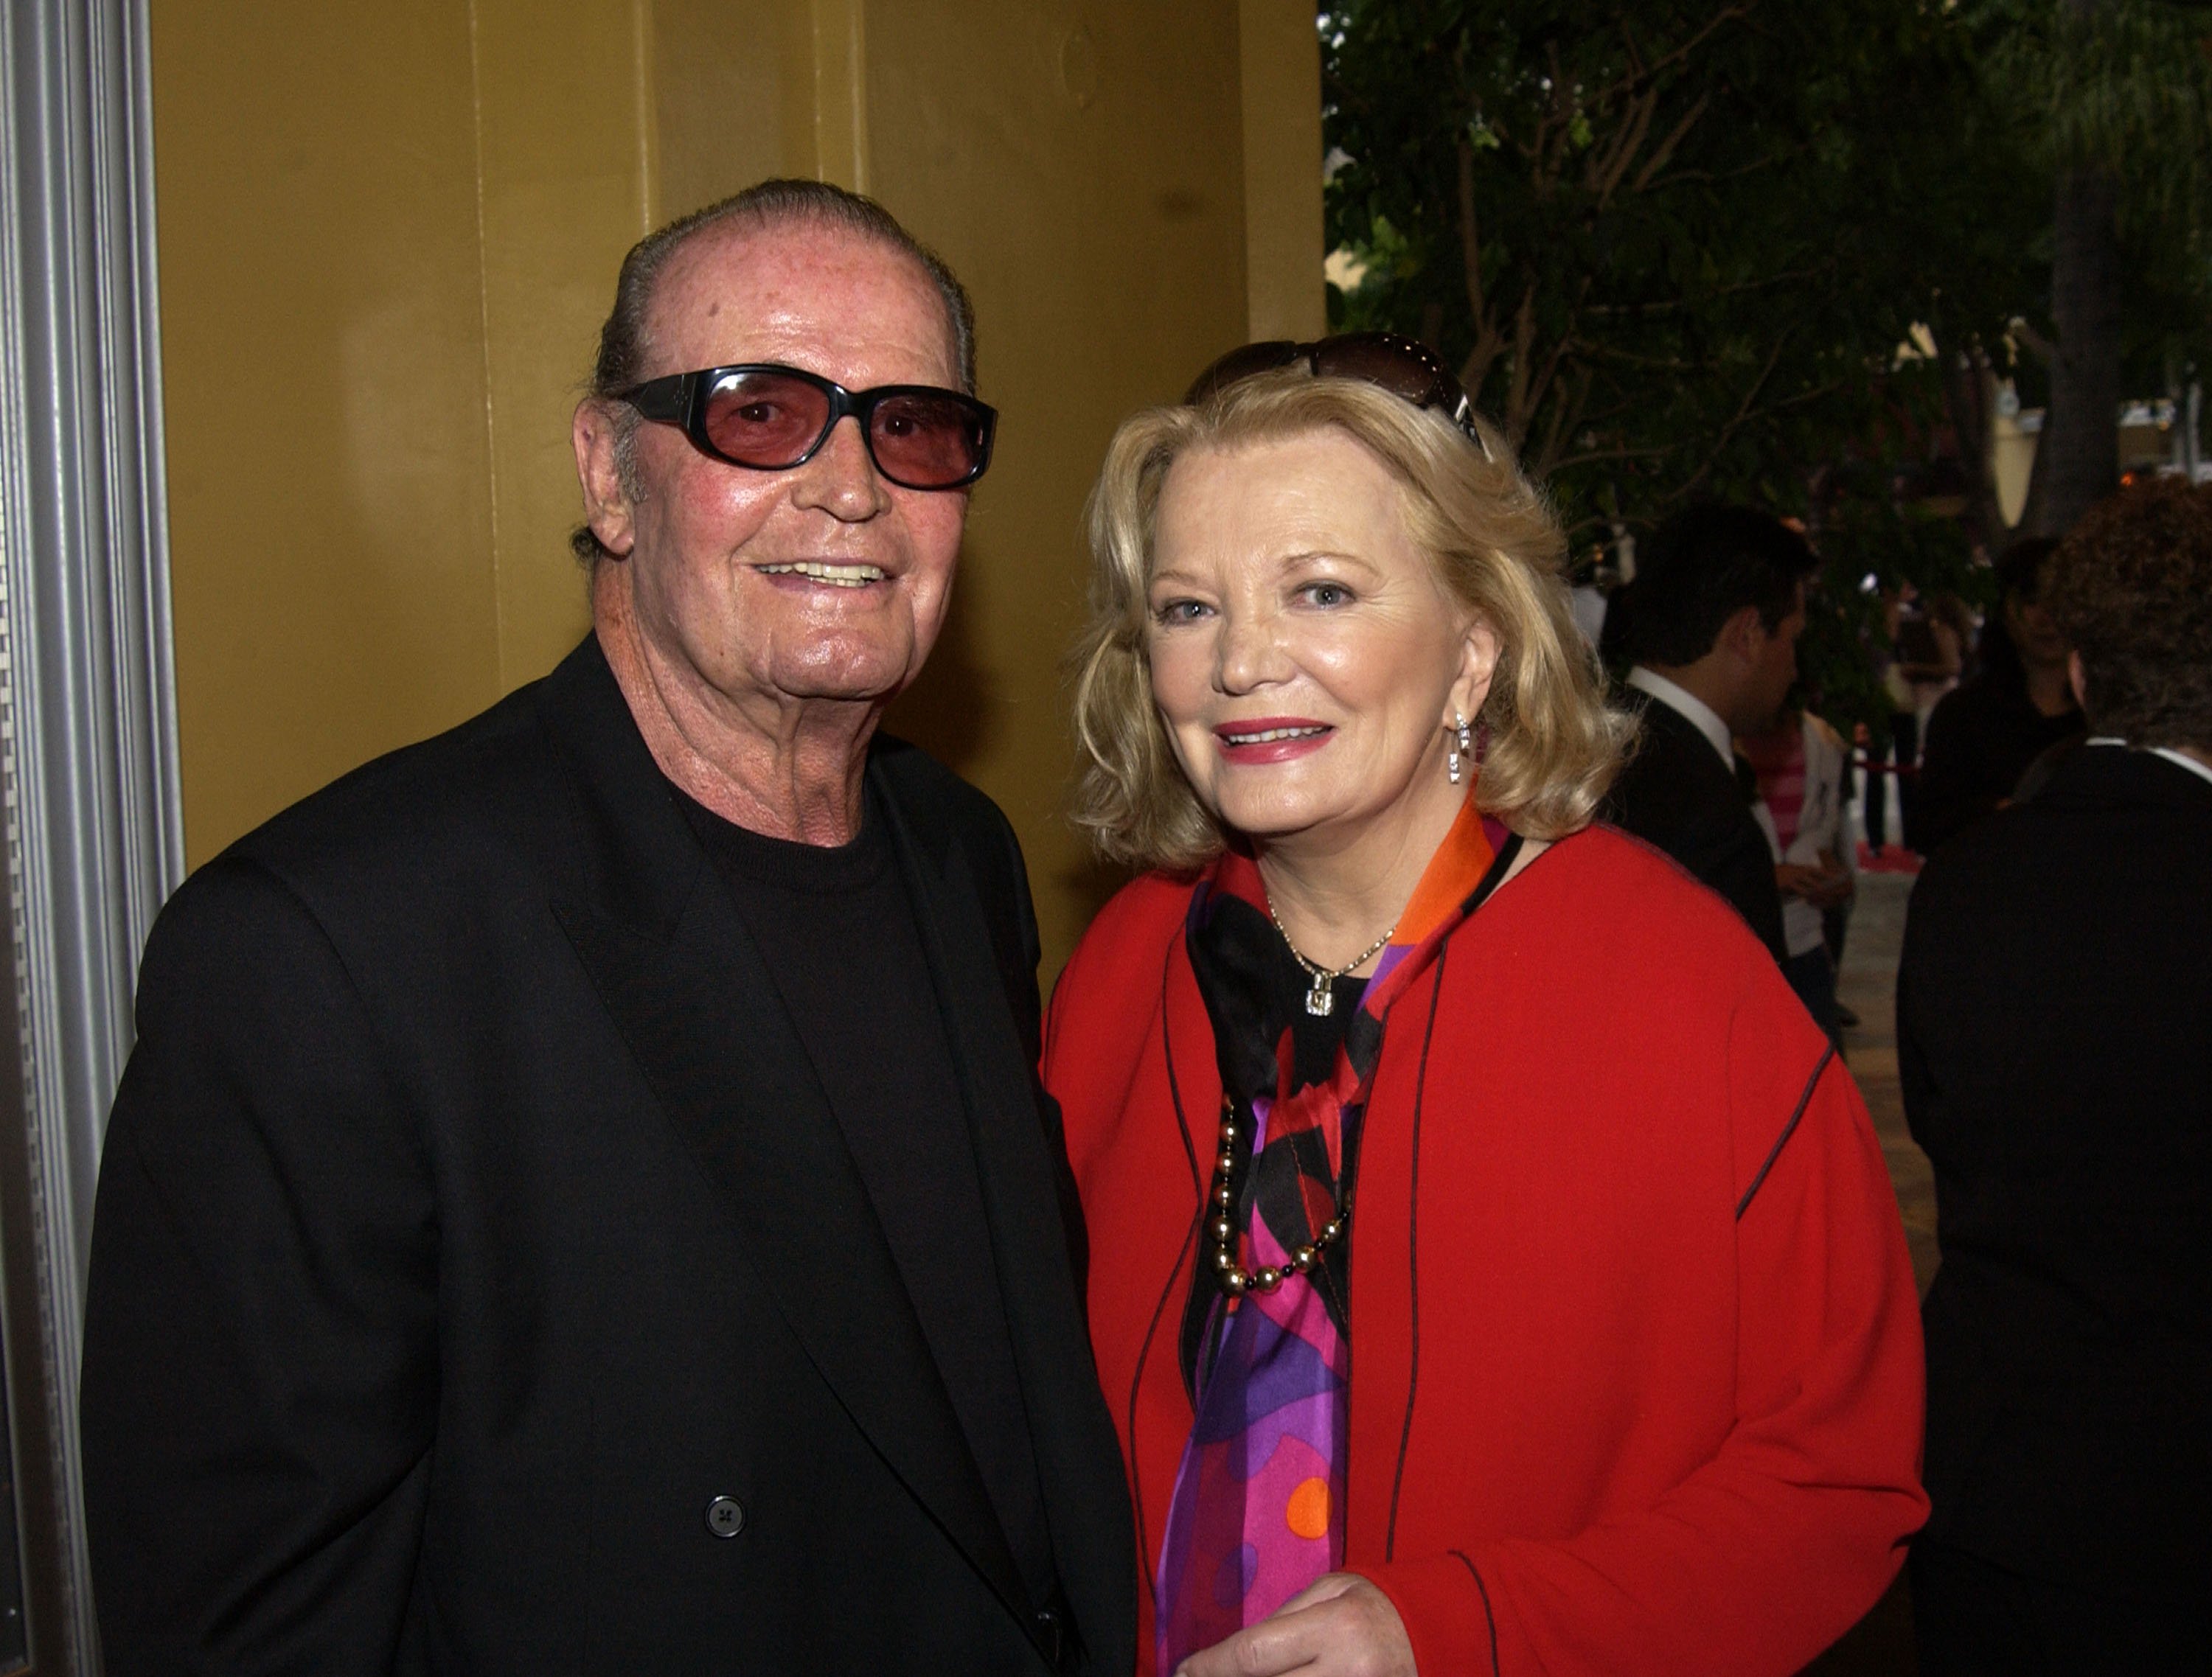 The Notebook cast members James Garner and Gena Rowlands together